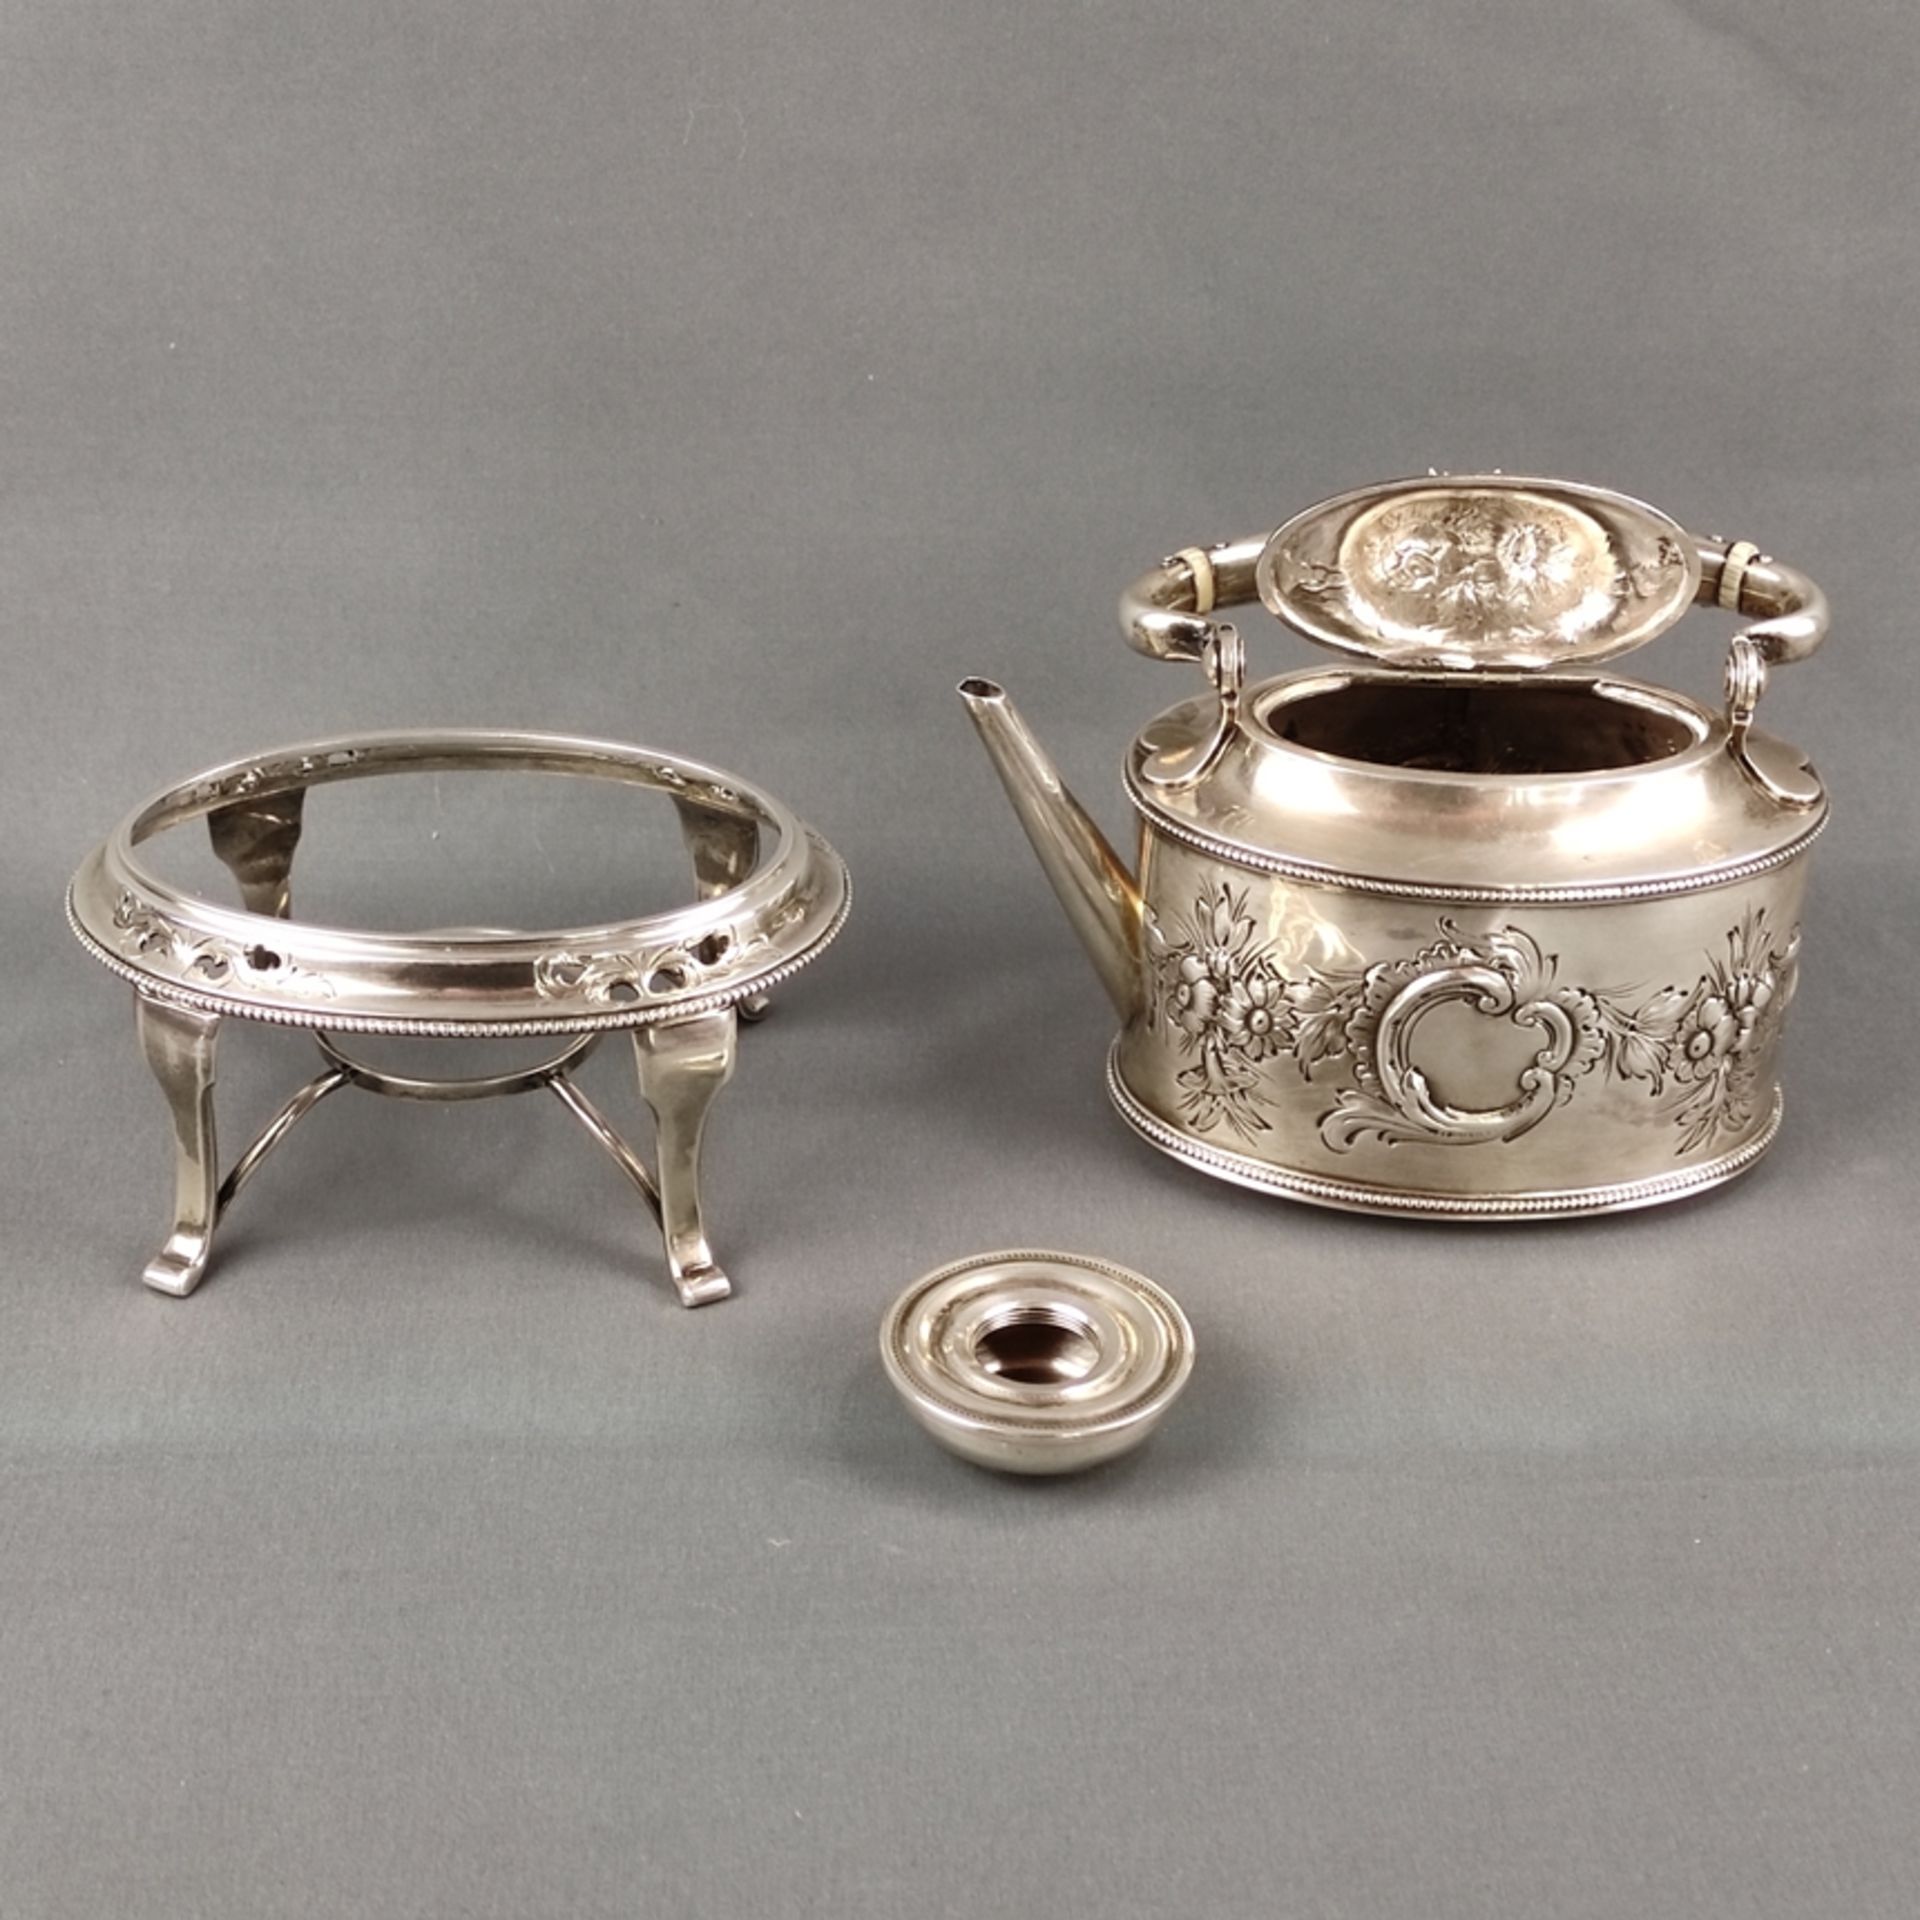 Tiffany & Co., 1856, John C. Moore & Son, teapot with rechaud, with floral decoration and fully scu - Image 3 of 4